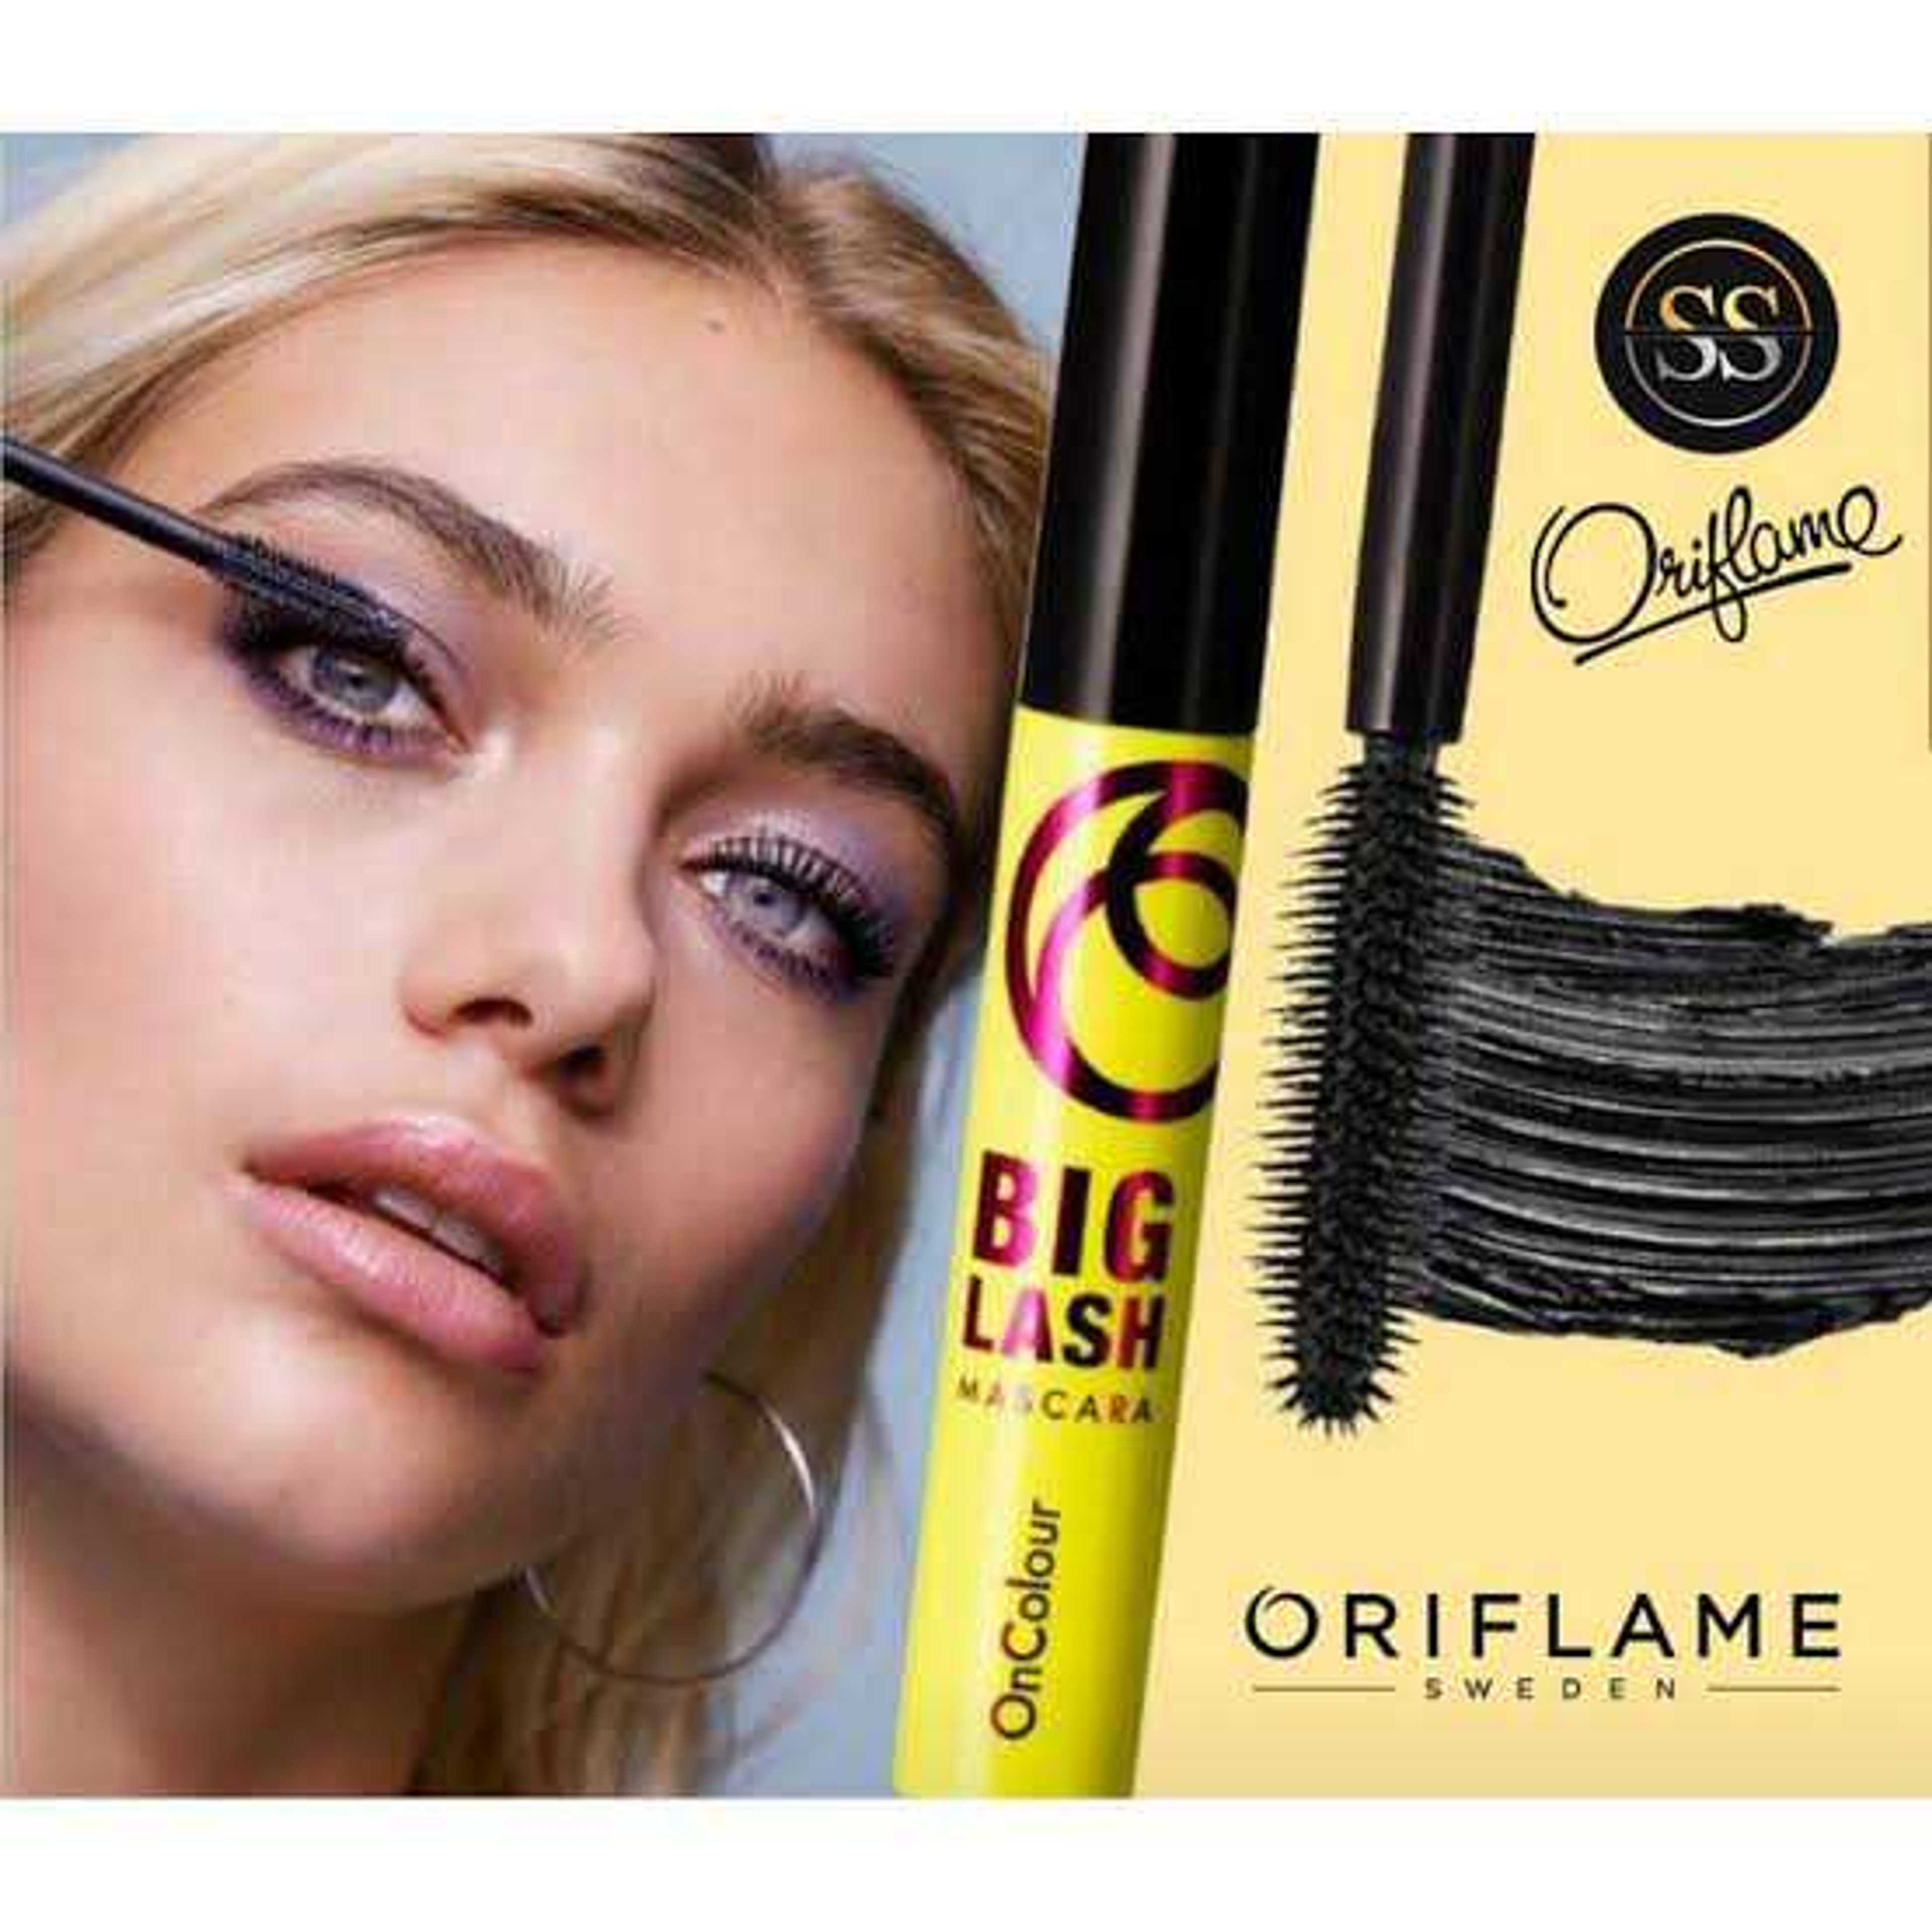 The One Big Lash Mascara by Oriflame 